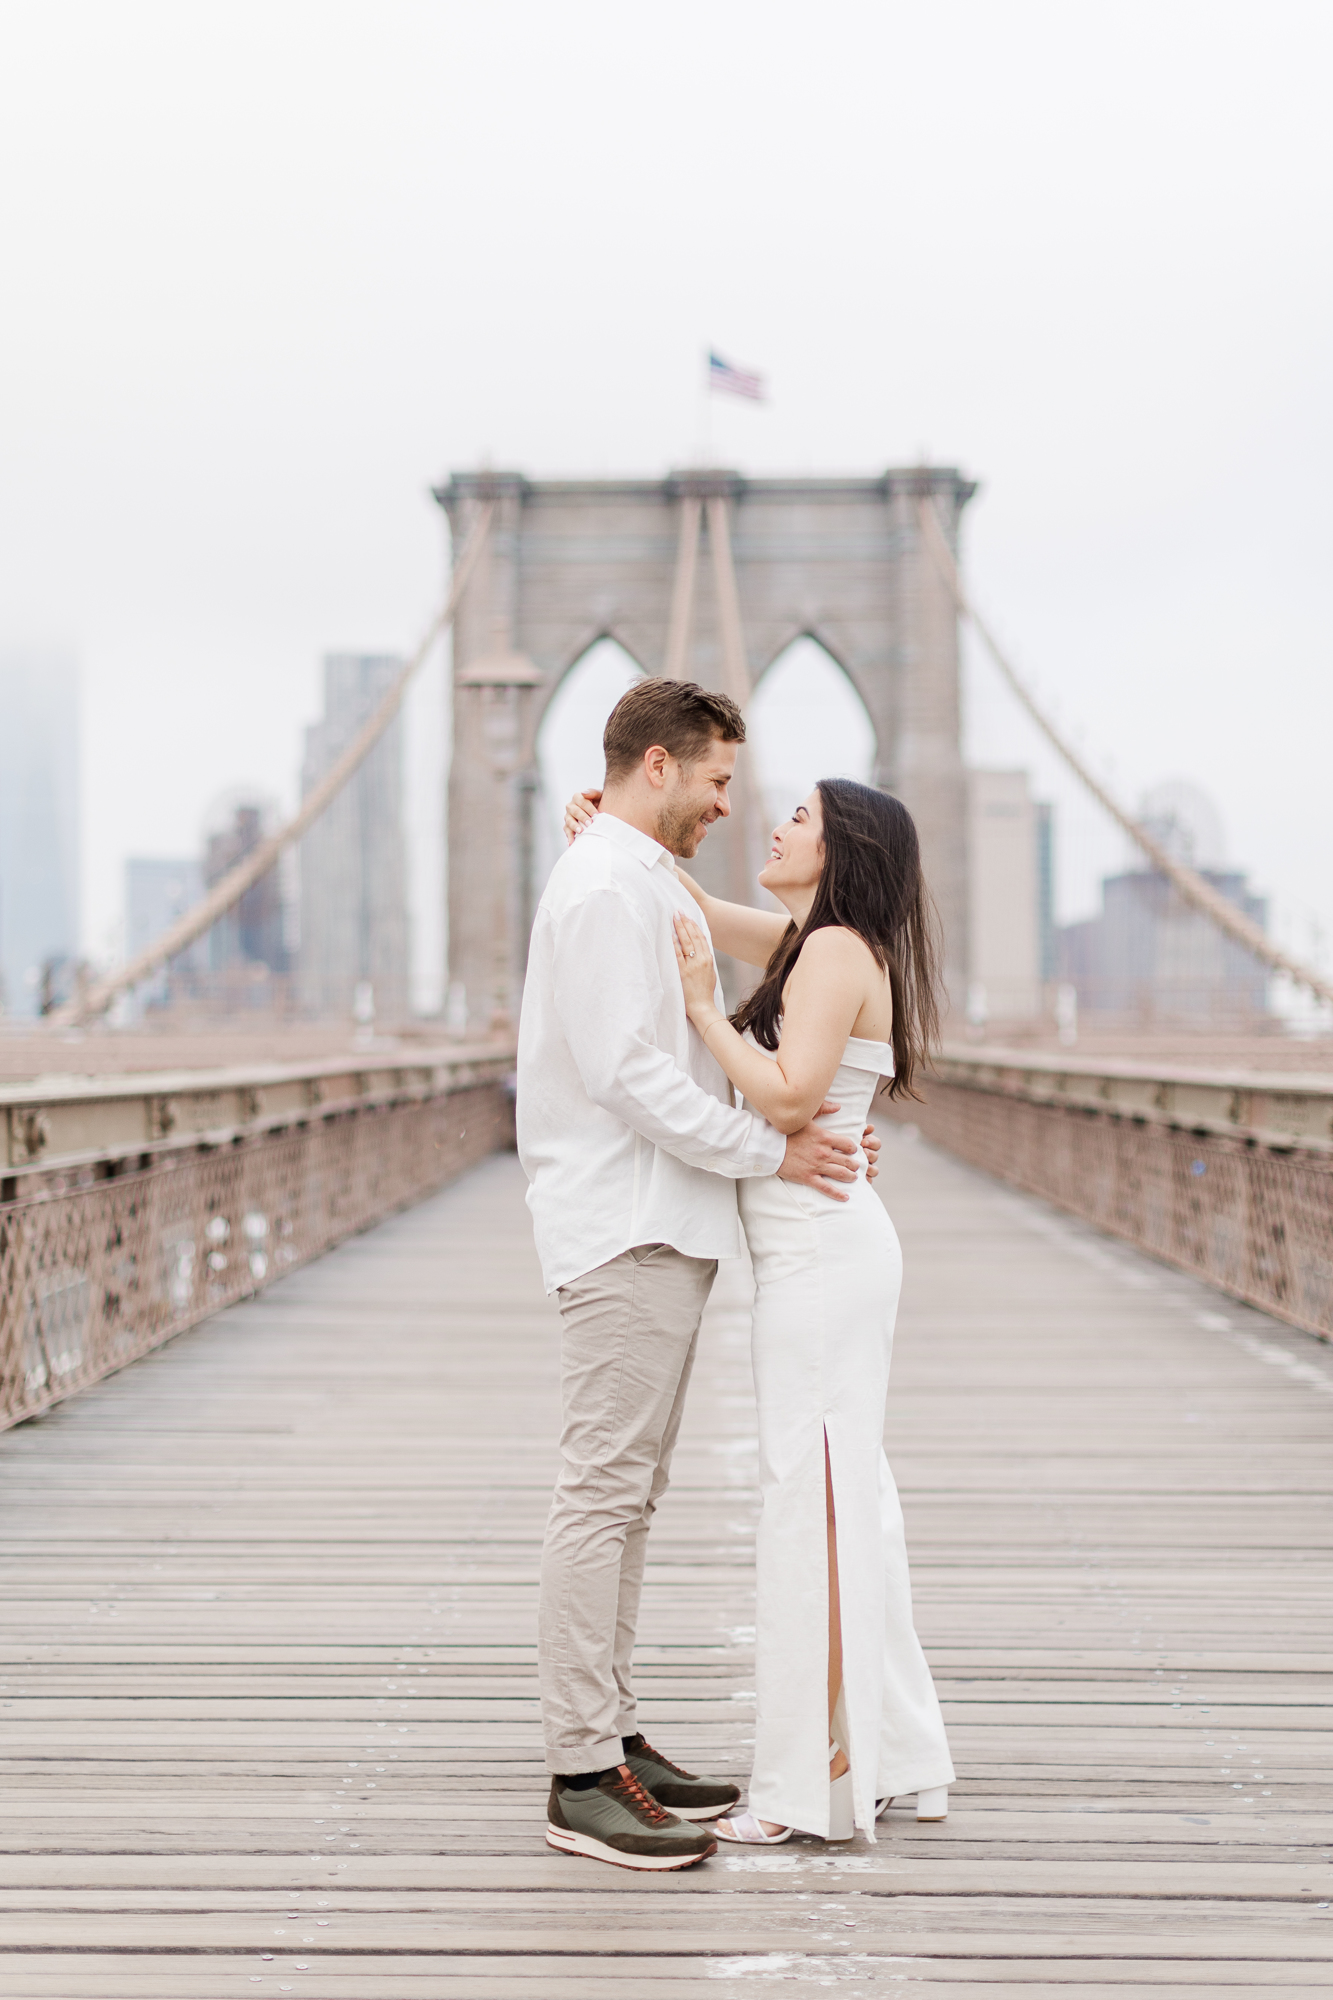 Personal Engagement Photography on the Brooklyn Bridge